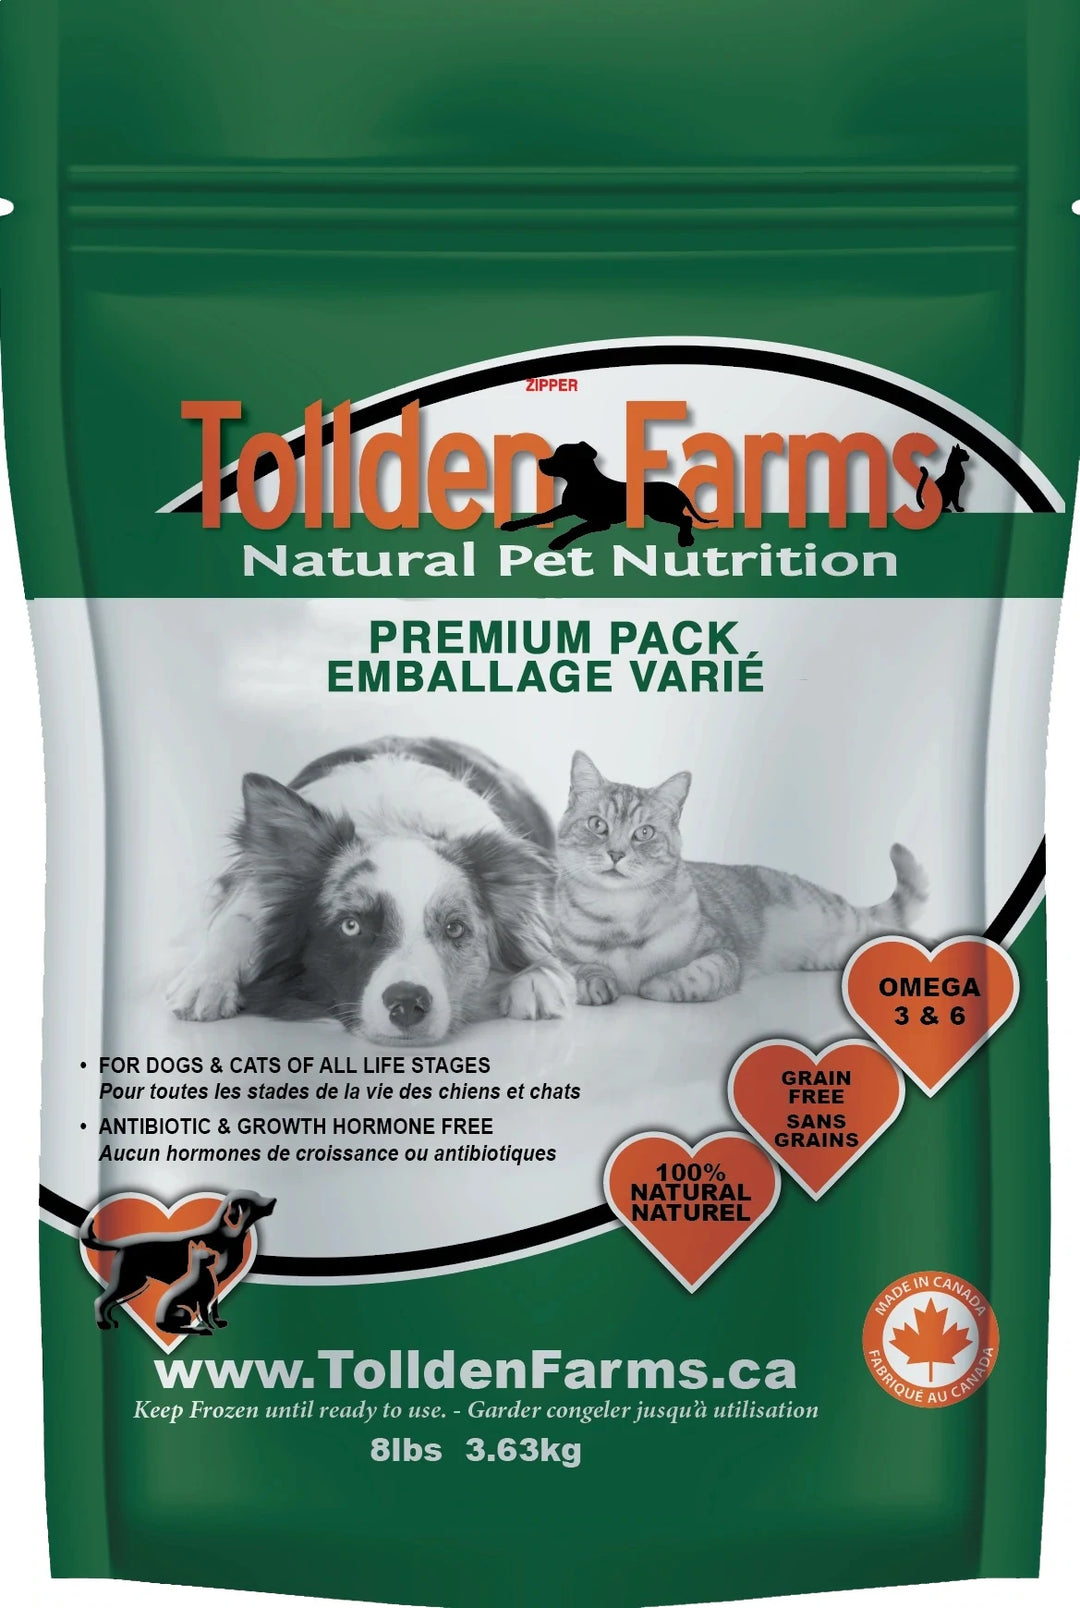 Tollden Farms Variety Pack (Beef, Chicken, Turkey & Boar) Raw Dog Food